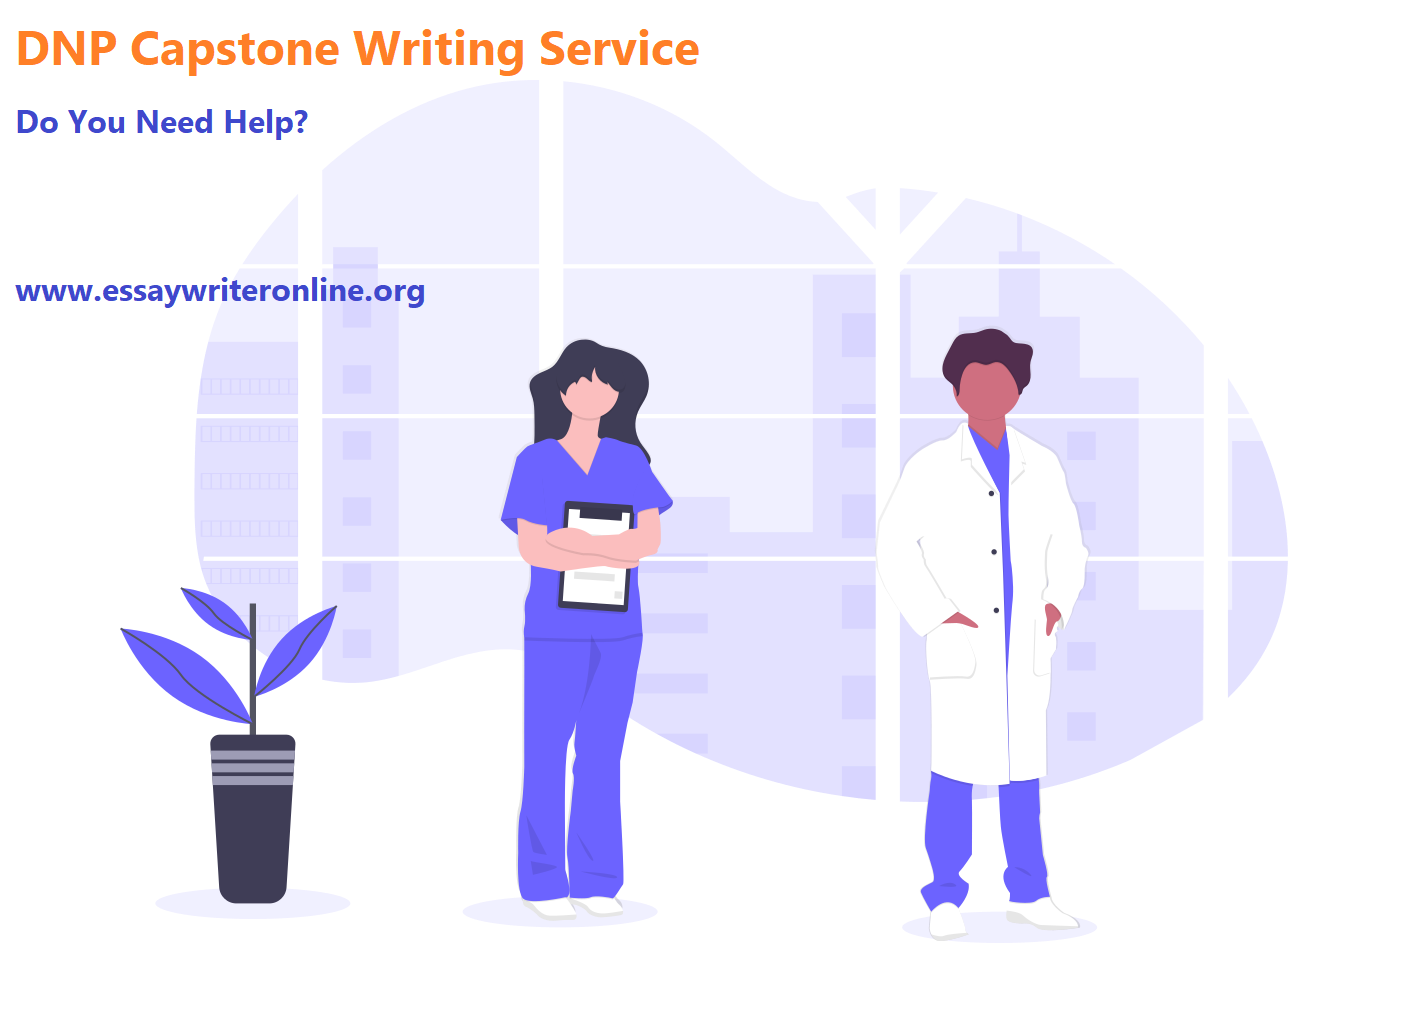 DNP Capstone Project Writing Services